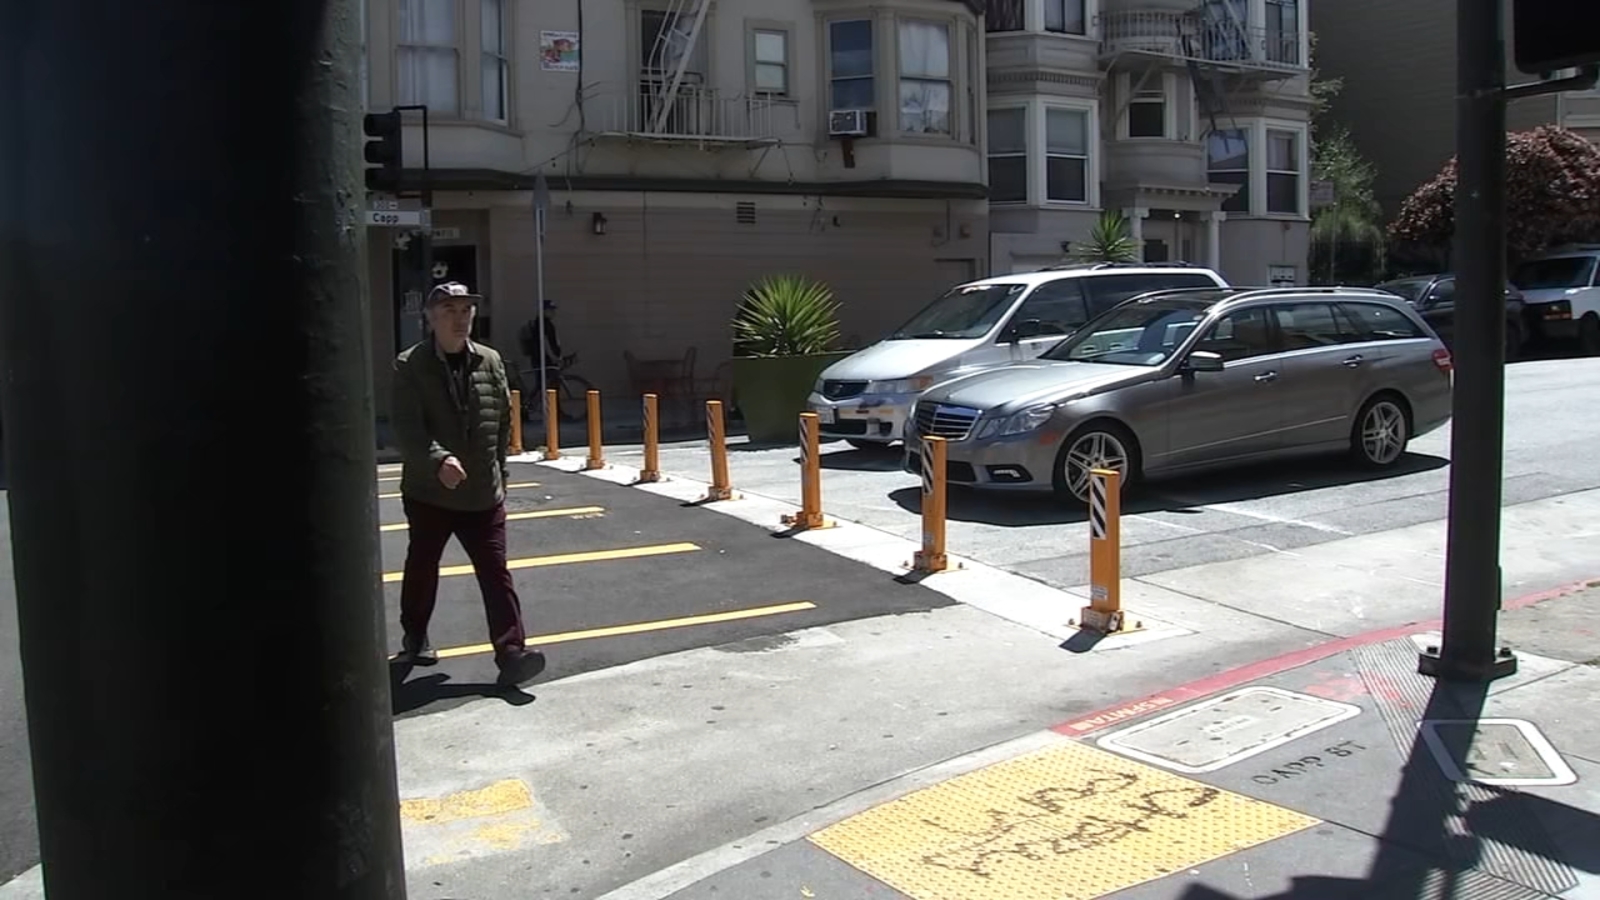 San Francisco Capp Street sex worker issue improved but now drivers blocking barriers are creating hazards [Video]